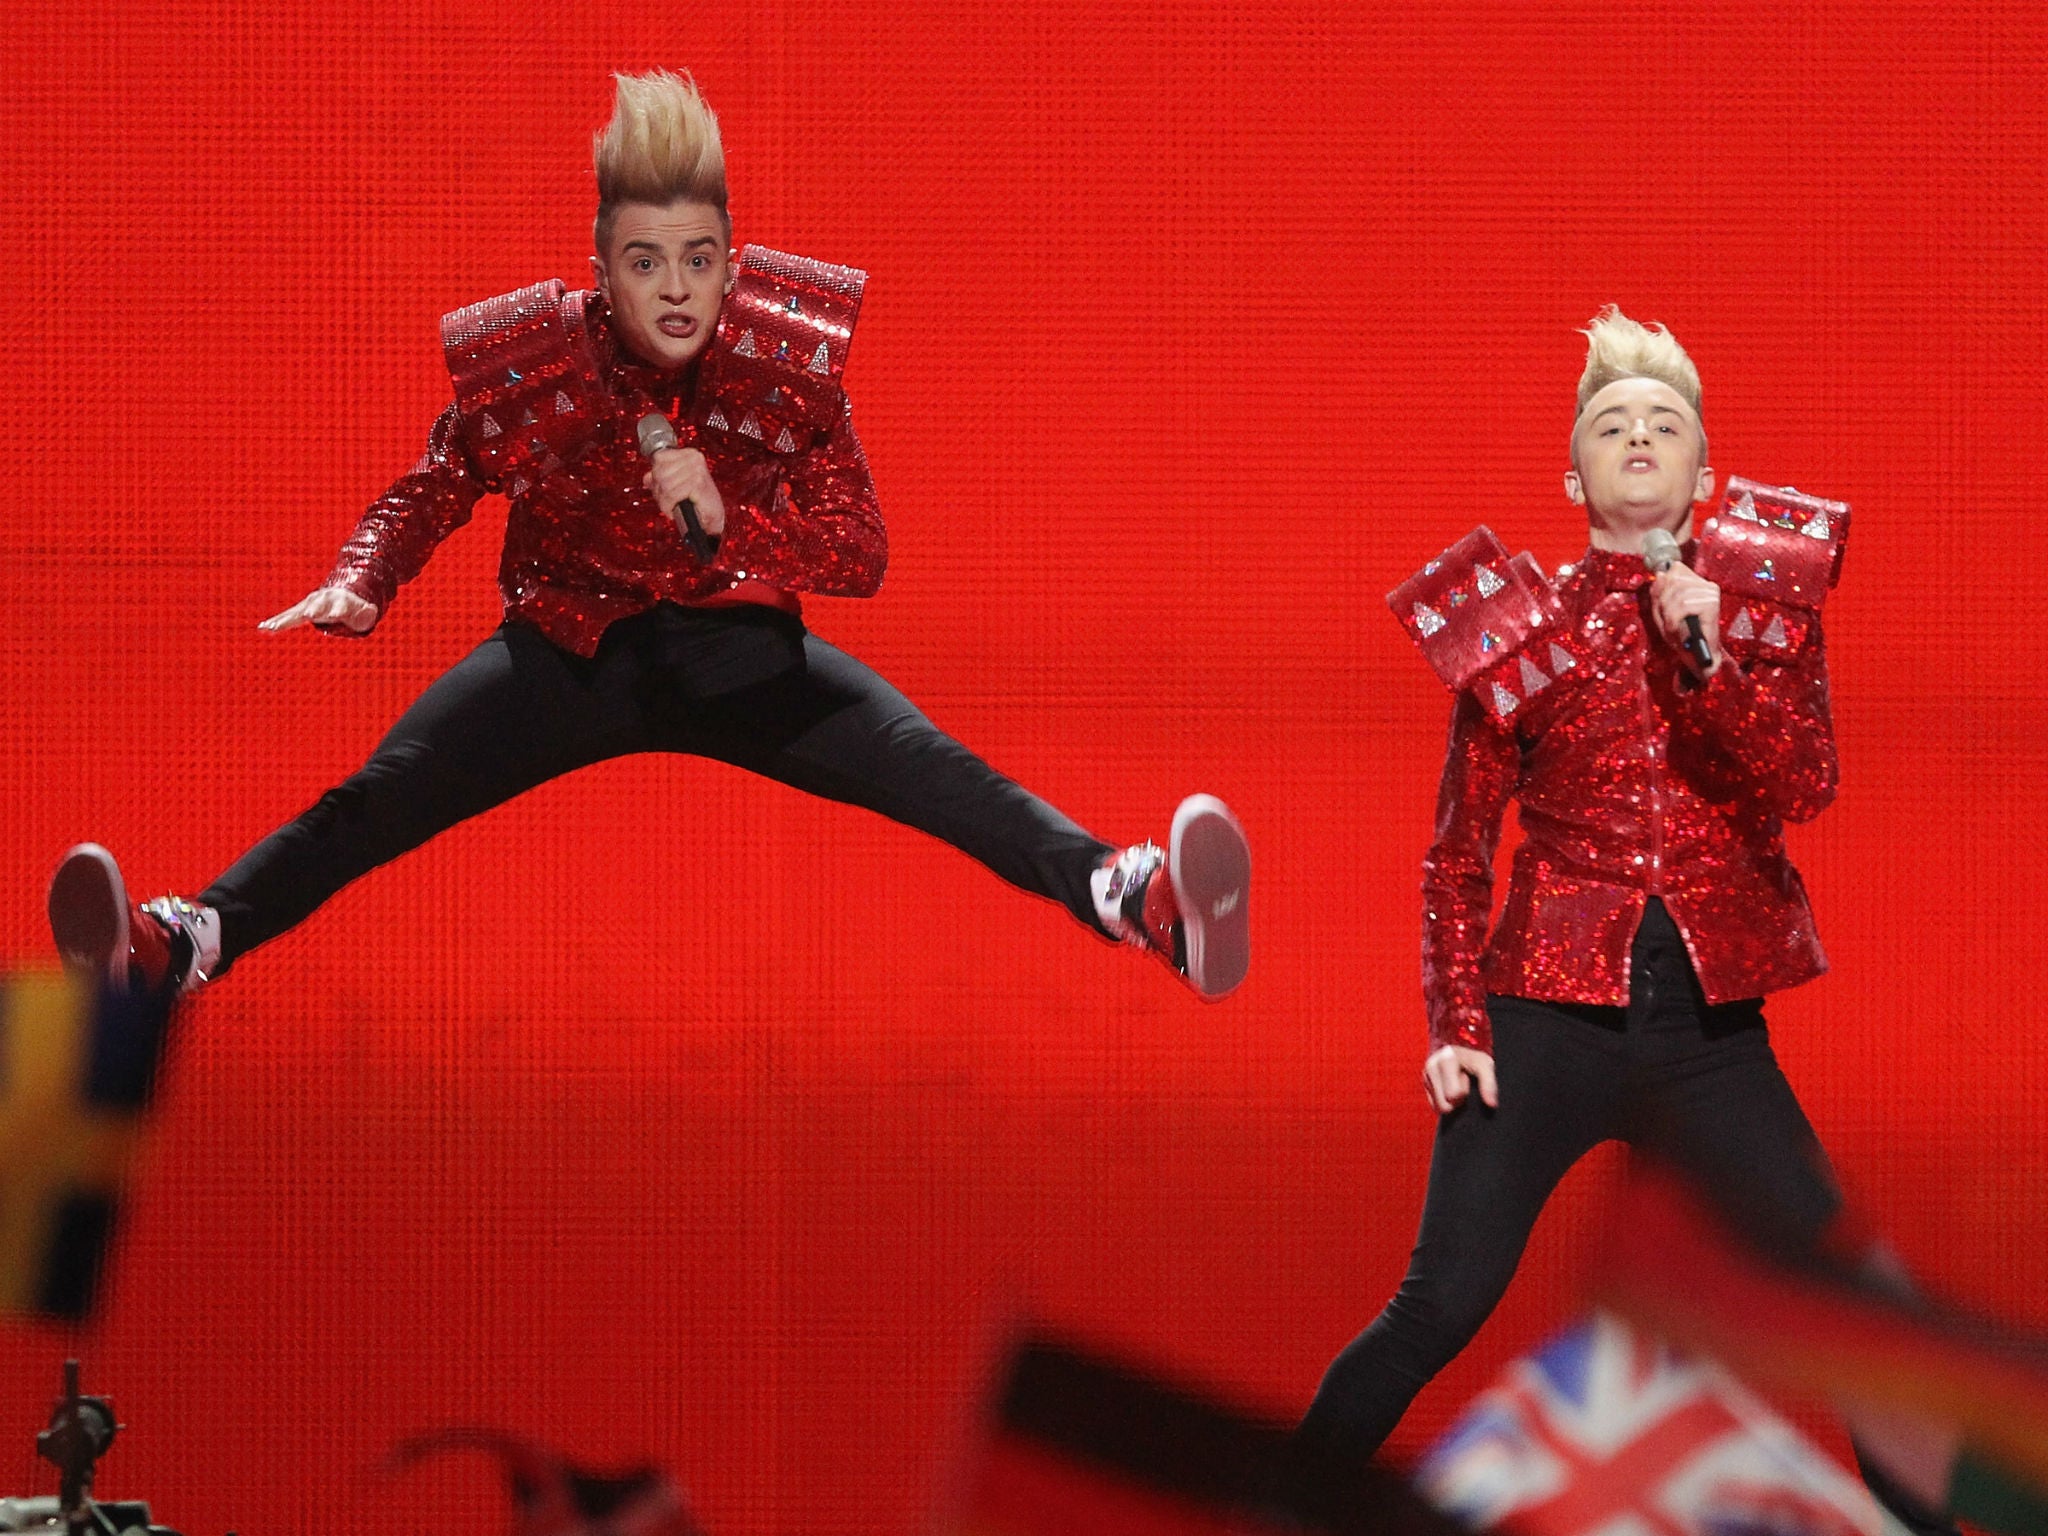 Jedward sang some nonsense about lipstick for Ireland in 2014